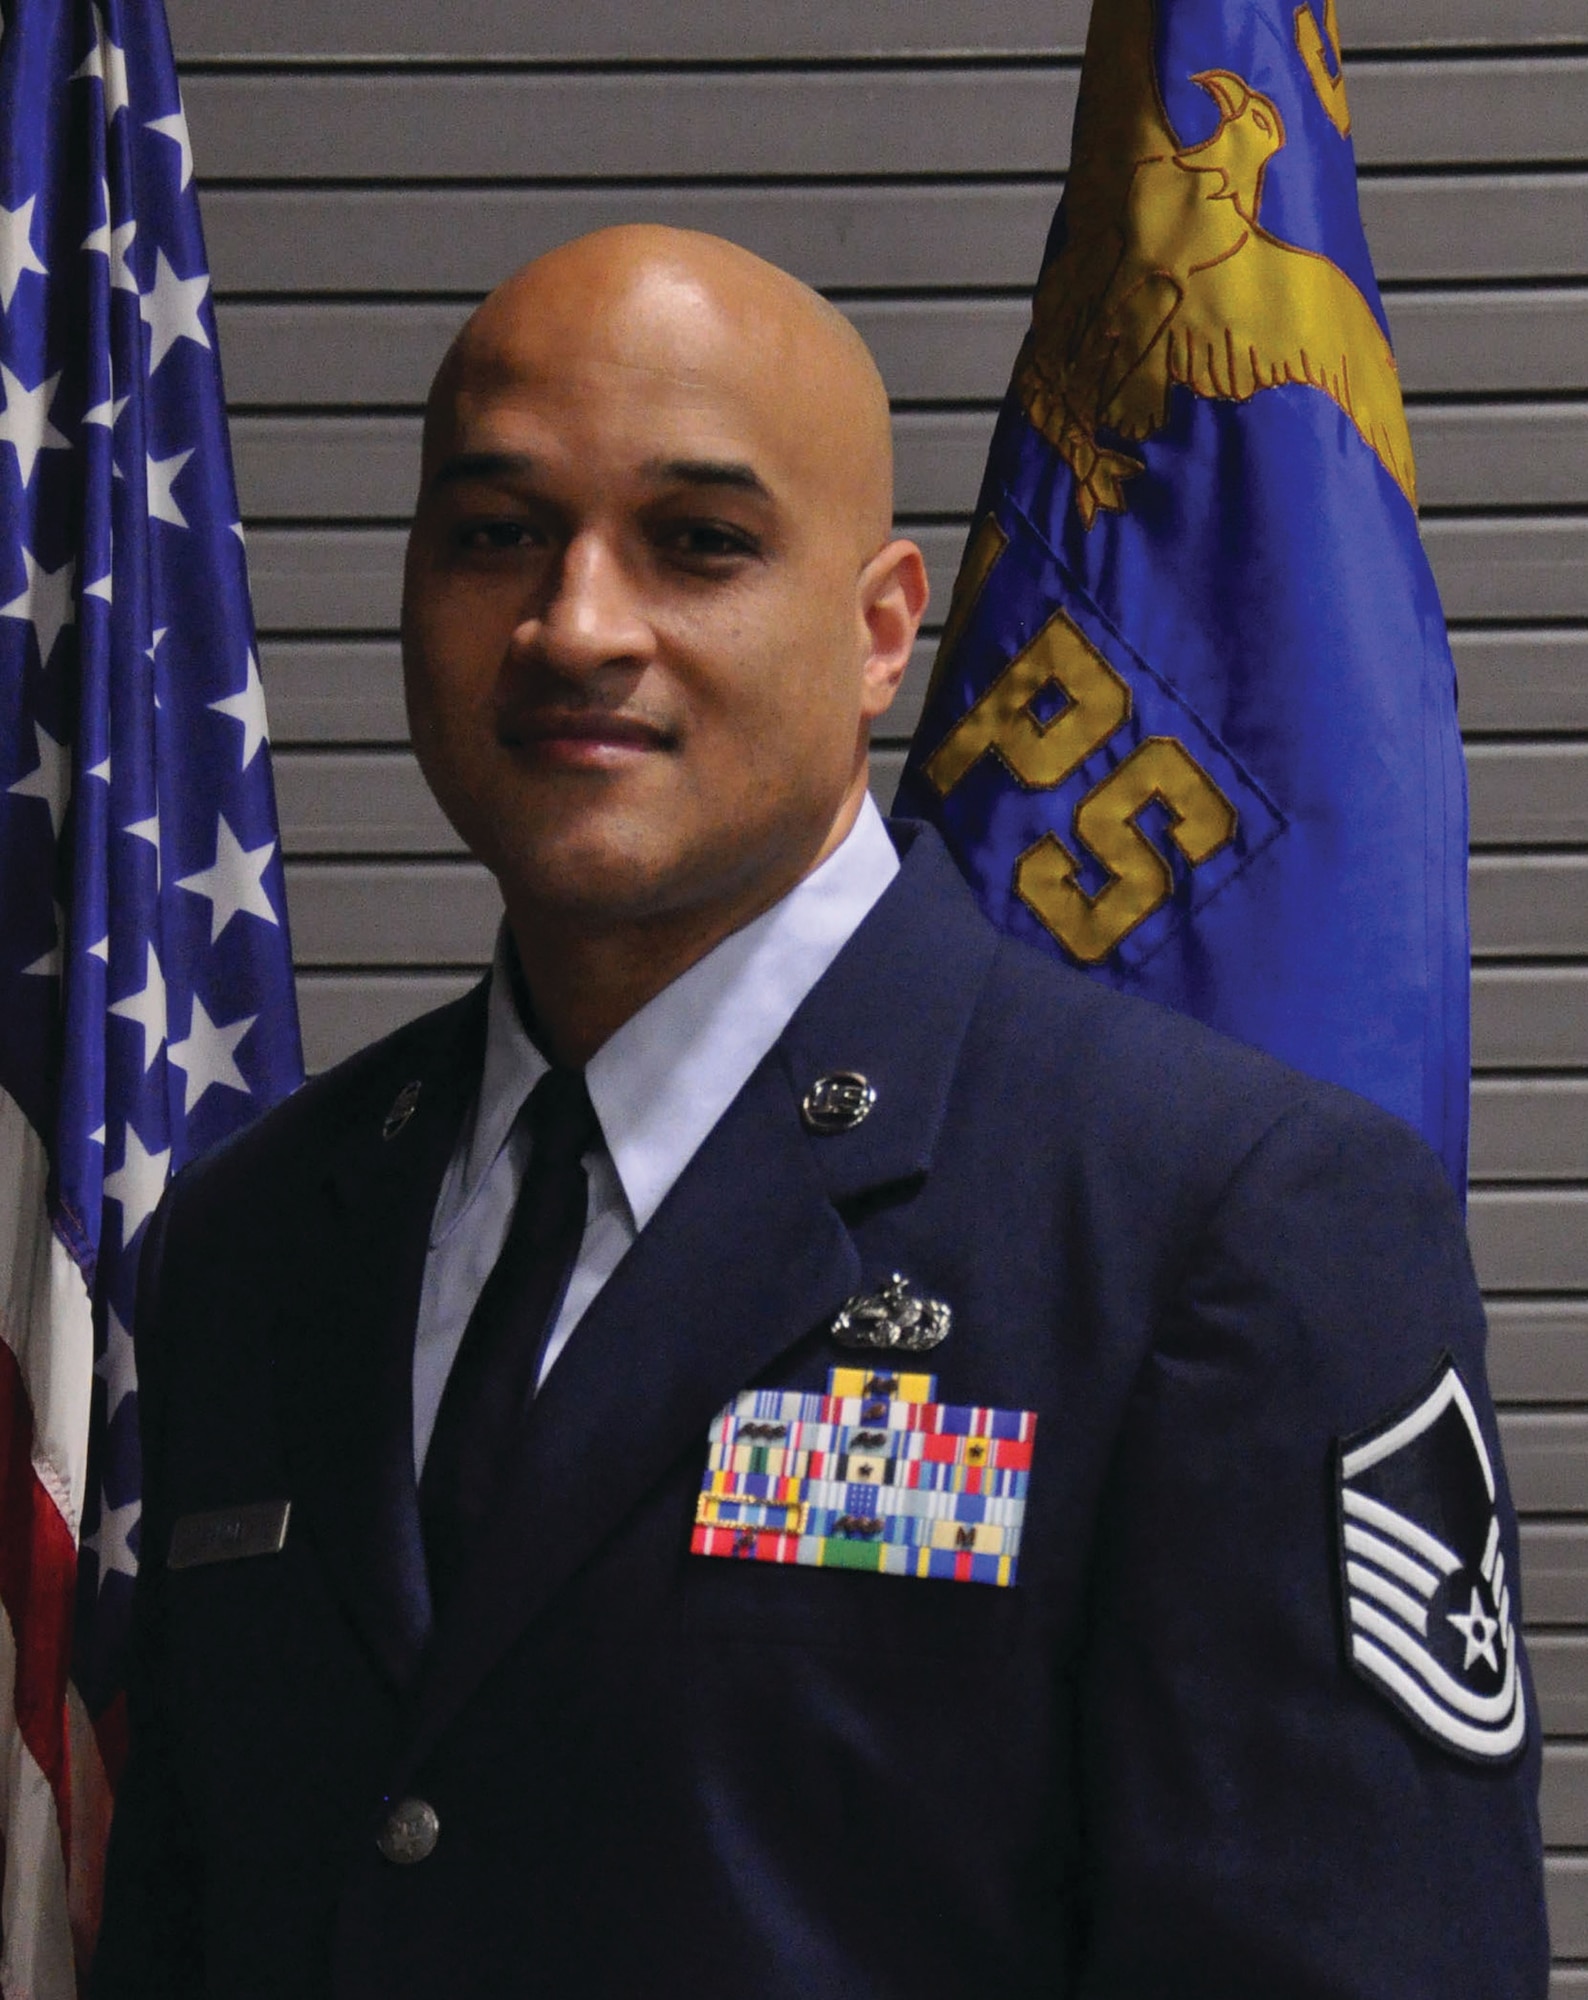 WRIGHT-PATTERSON AIR FORCE BASE, Ohio - Master Sgt. Cleve Samuel, III, 87th Aerial Port Squadron air transportation craftsman, is the 445th Airlift Wing’s Senior NCO of the Quarter, first quarter. 